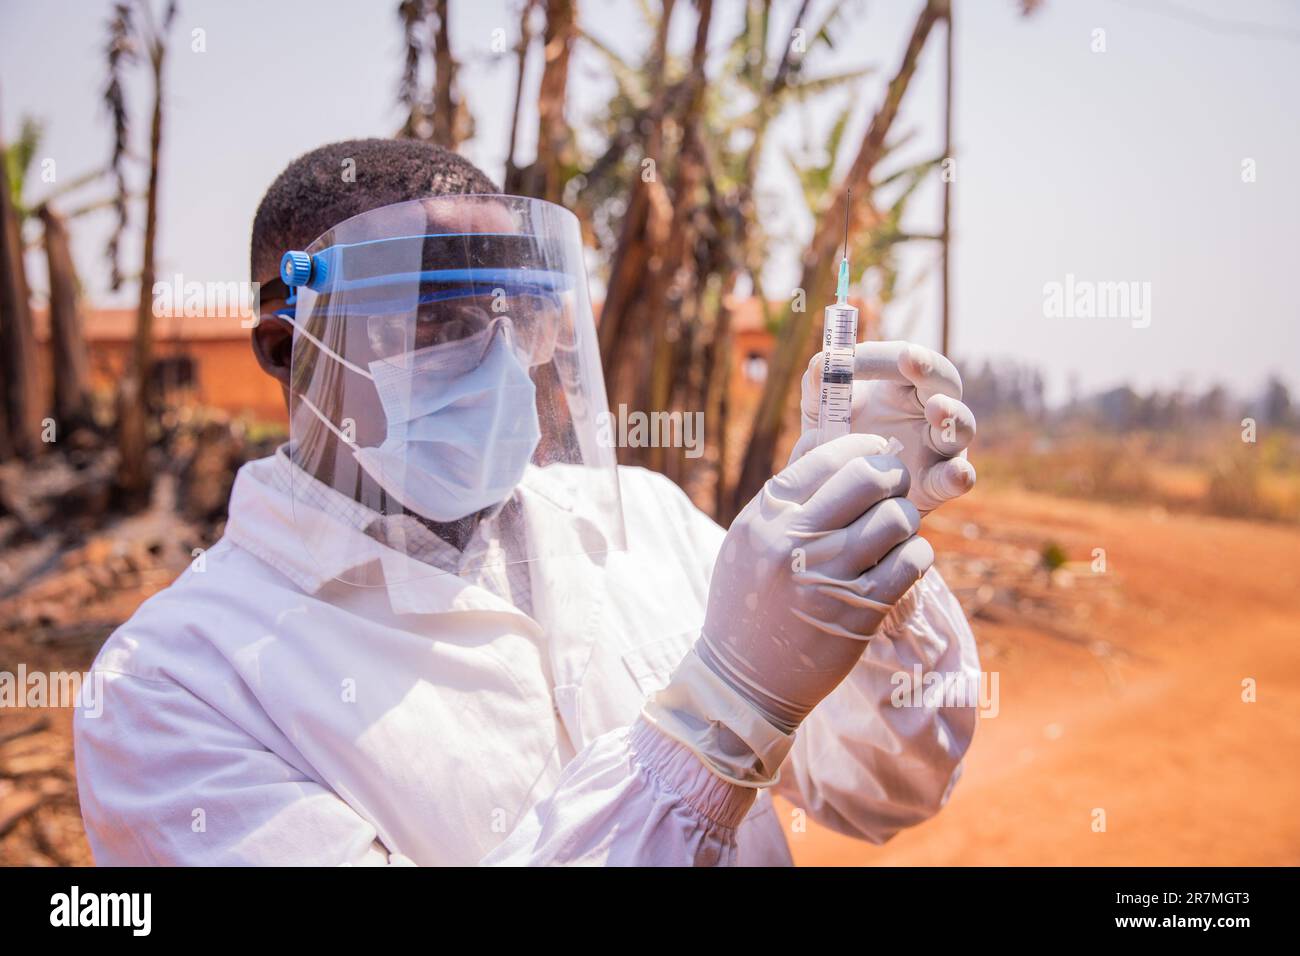 A doctor in Africa checks the vaccine syringe Stock Photo